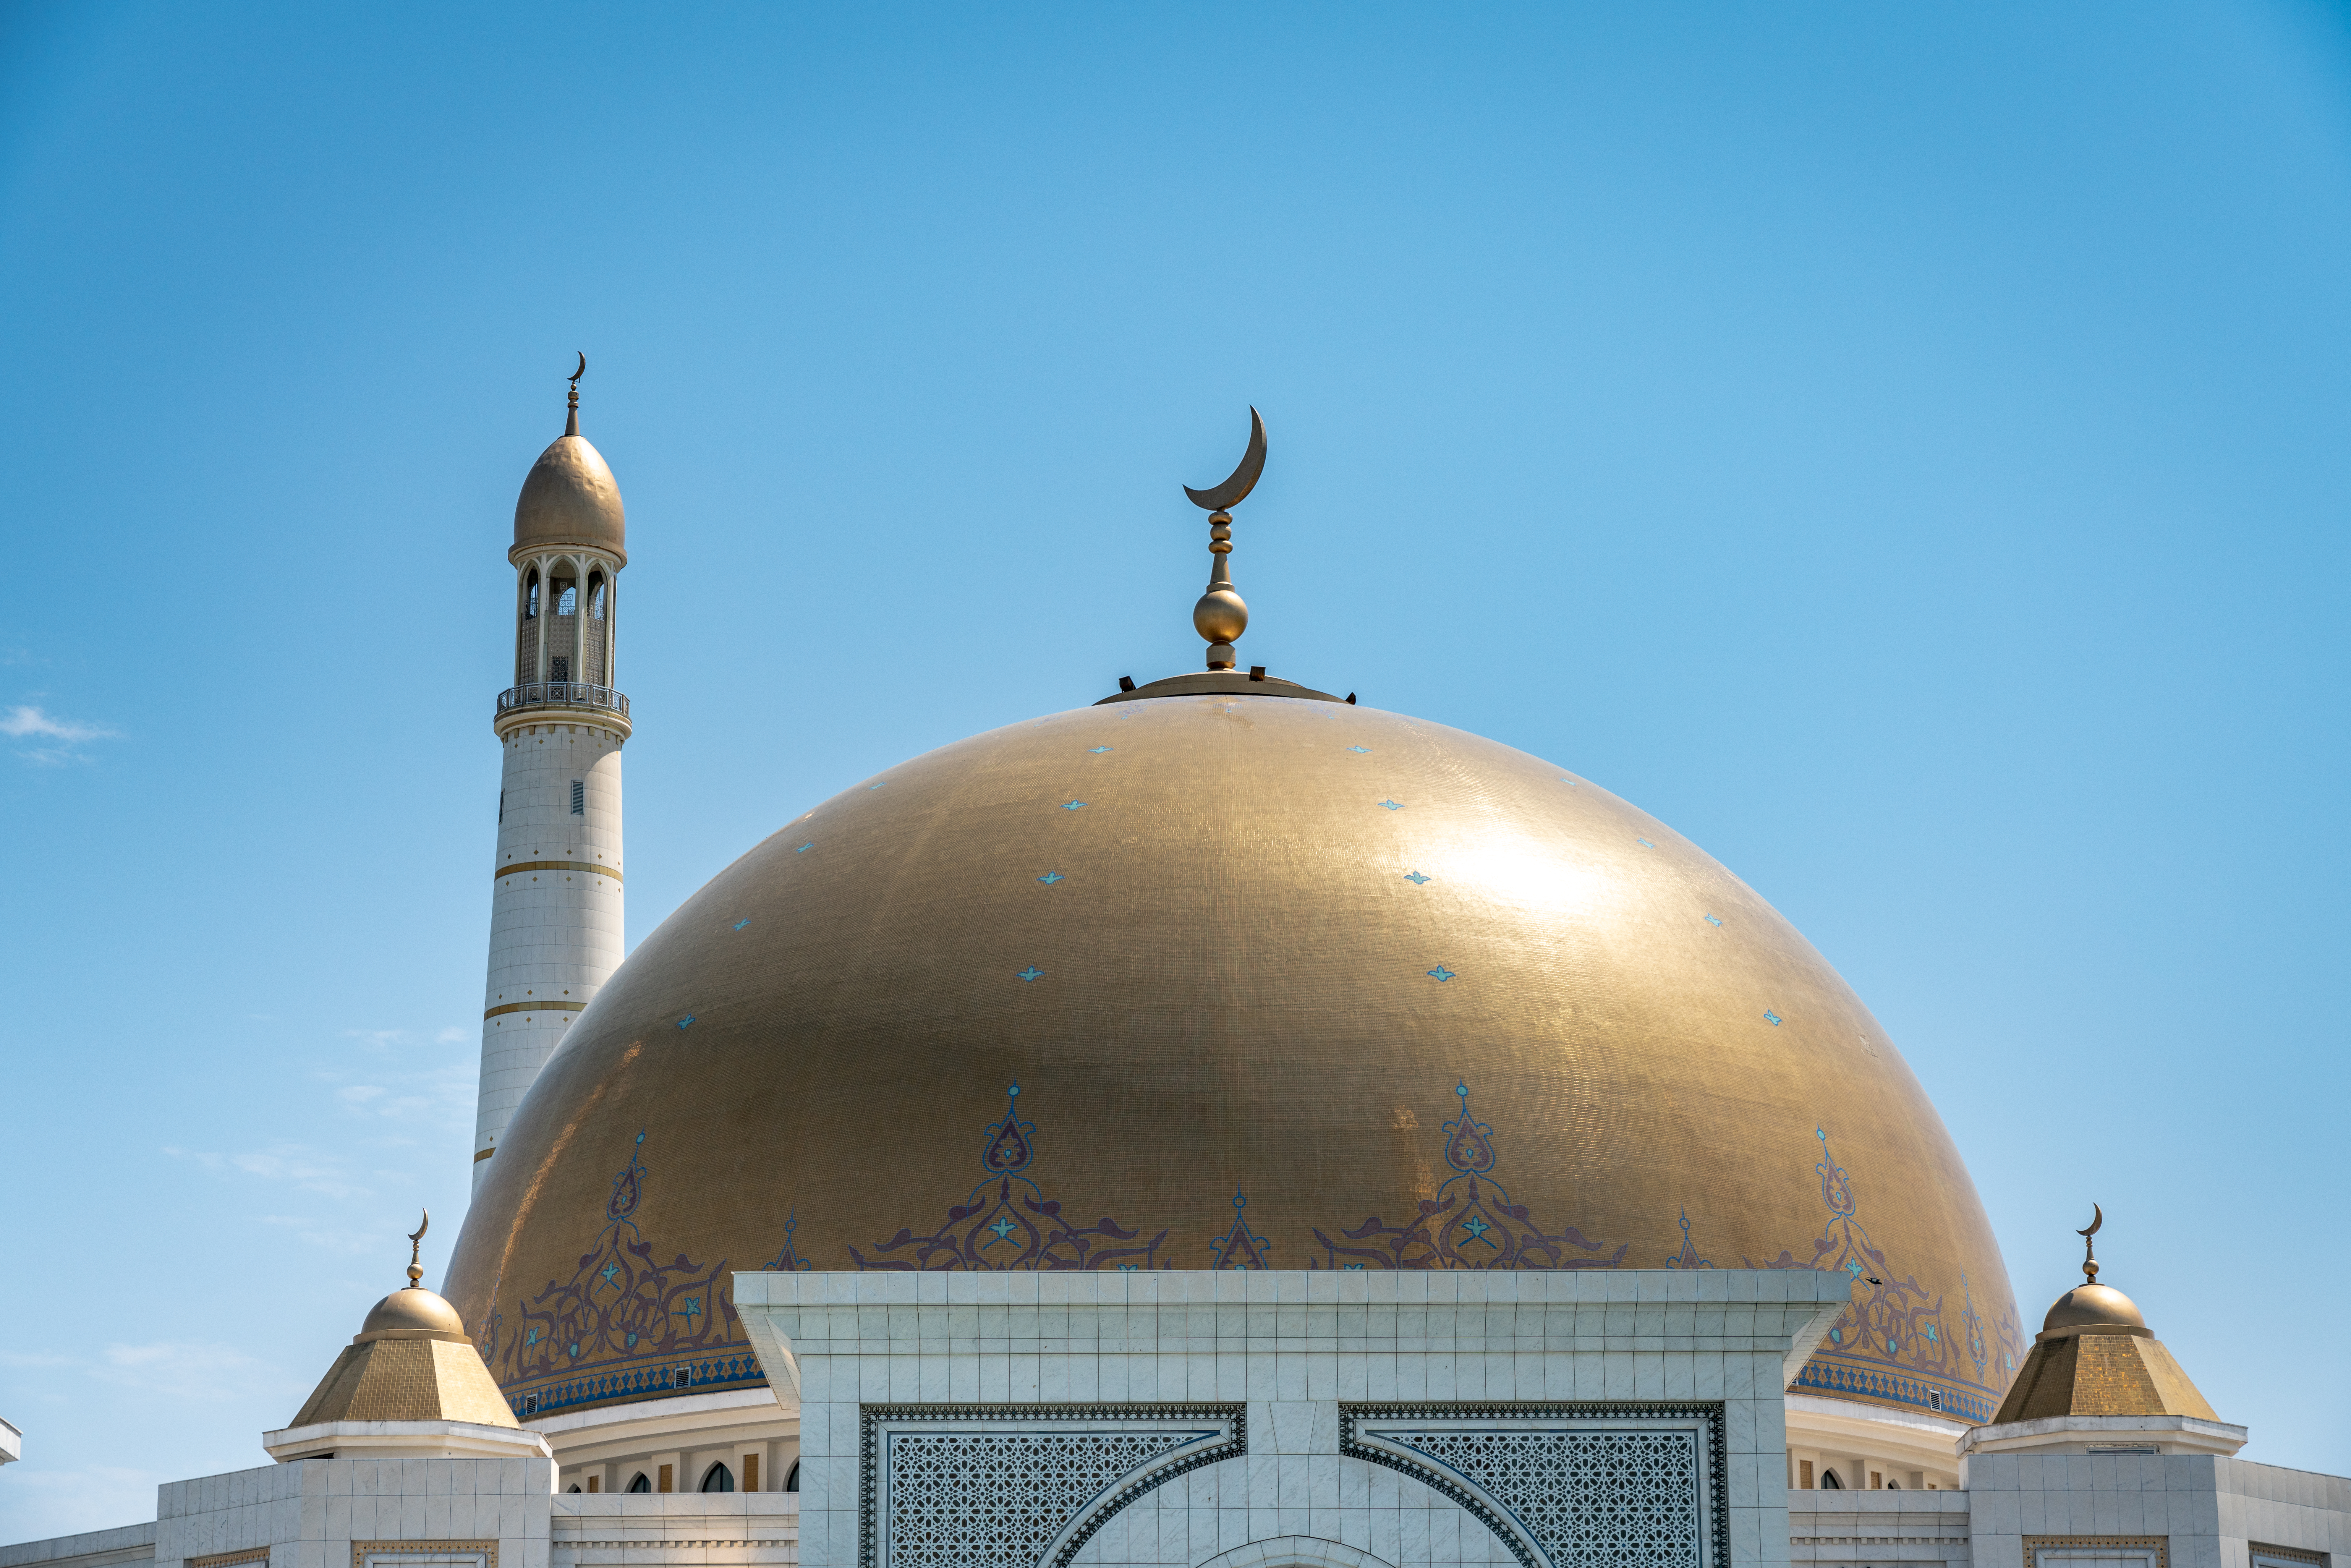 The mosque's gorgeous golden dome continues to impress visitors. © LMspencer / Shutterstock